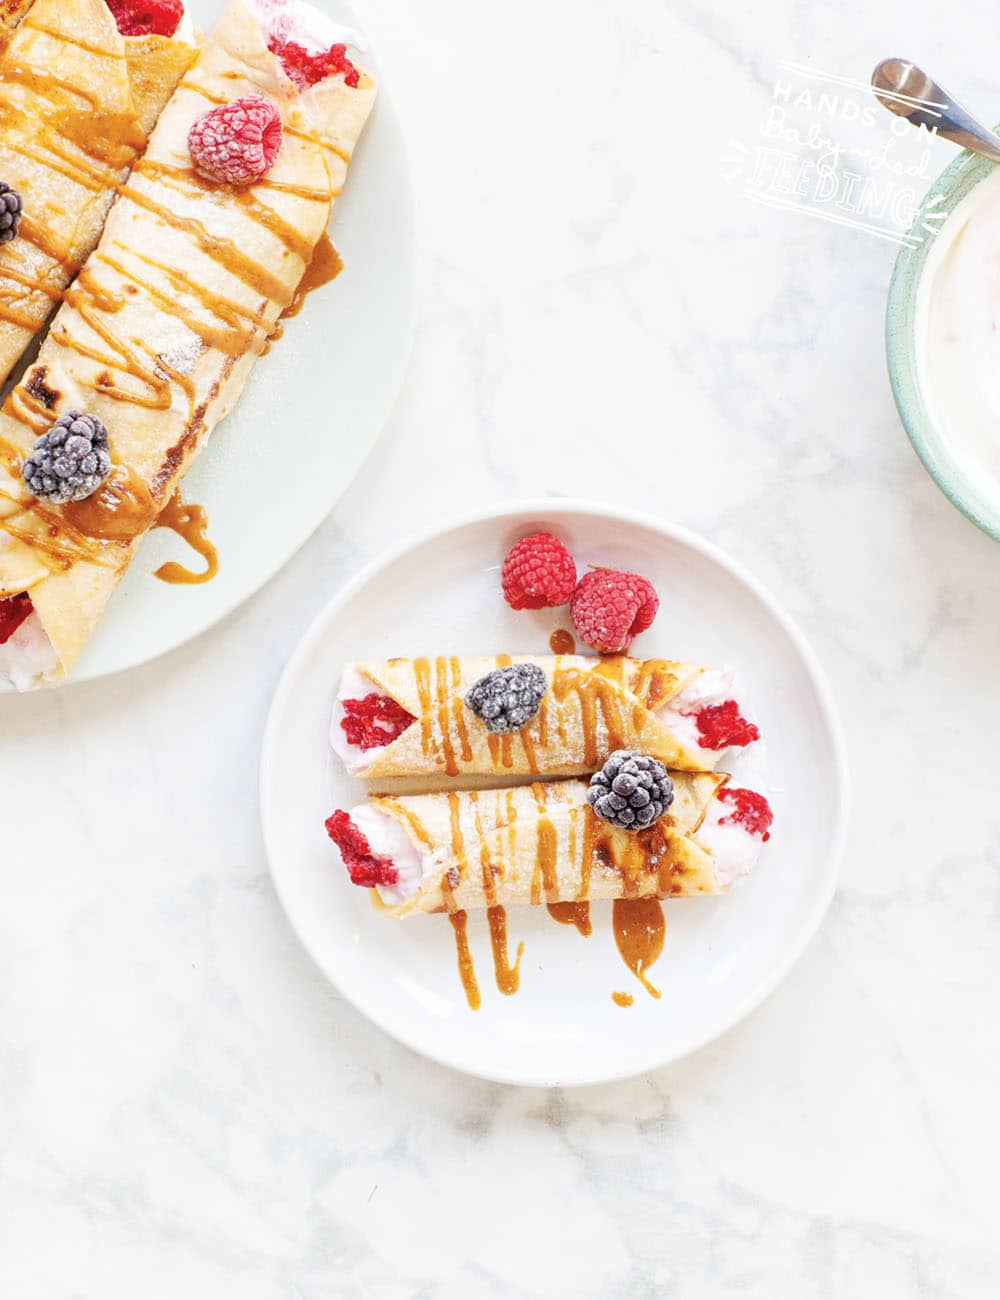 Ideas for baby breakfast! Pancake Tuesday Berry Yoghurt Baby Crepes! Sweetened naturally with fruit and wrapped in a SUPER easy crepe recipe with only 3 ingredients! Refined sugar-free breakfast or treat for babies. #babyledfeeding #babyledweaning #babybreakfast #babybreakfastideas #crepes #pancaketuesday